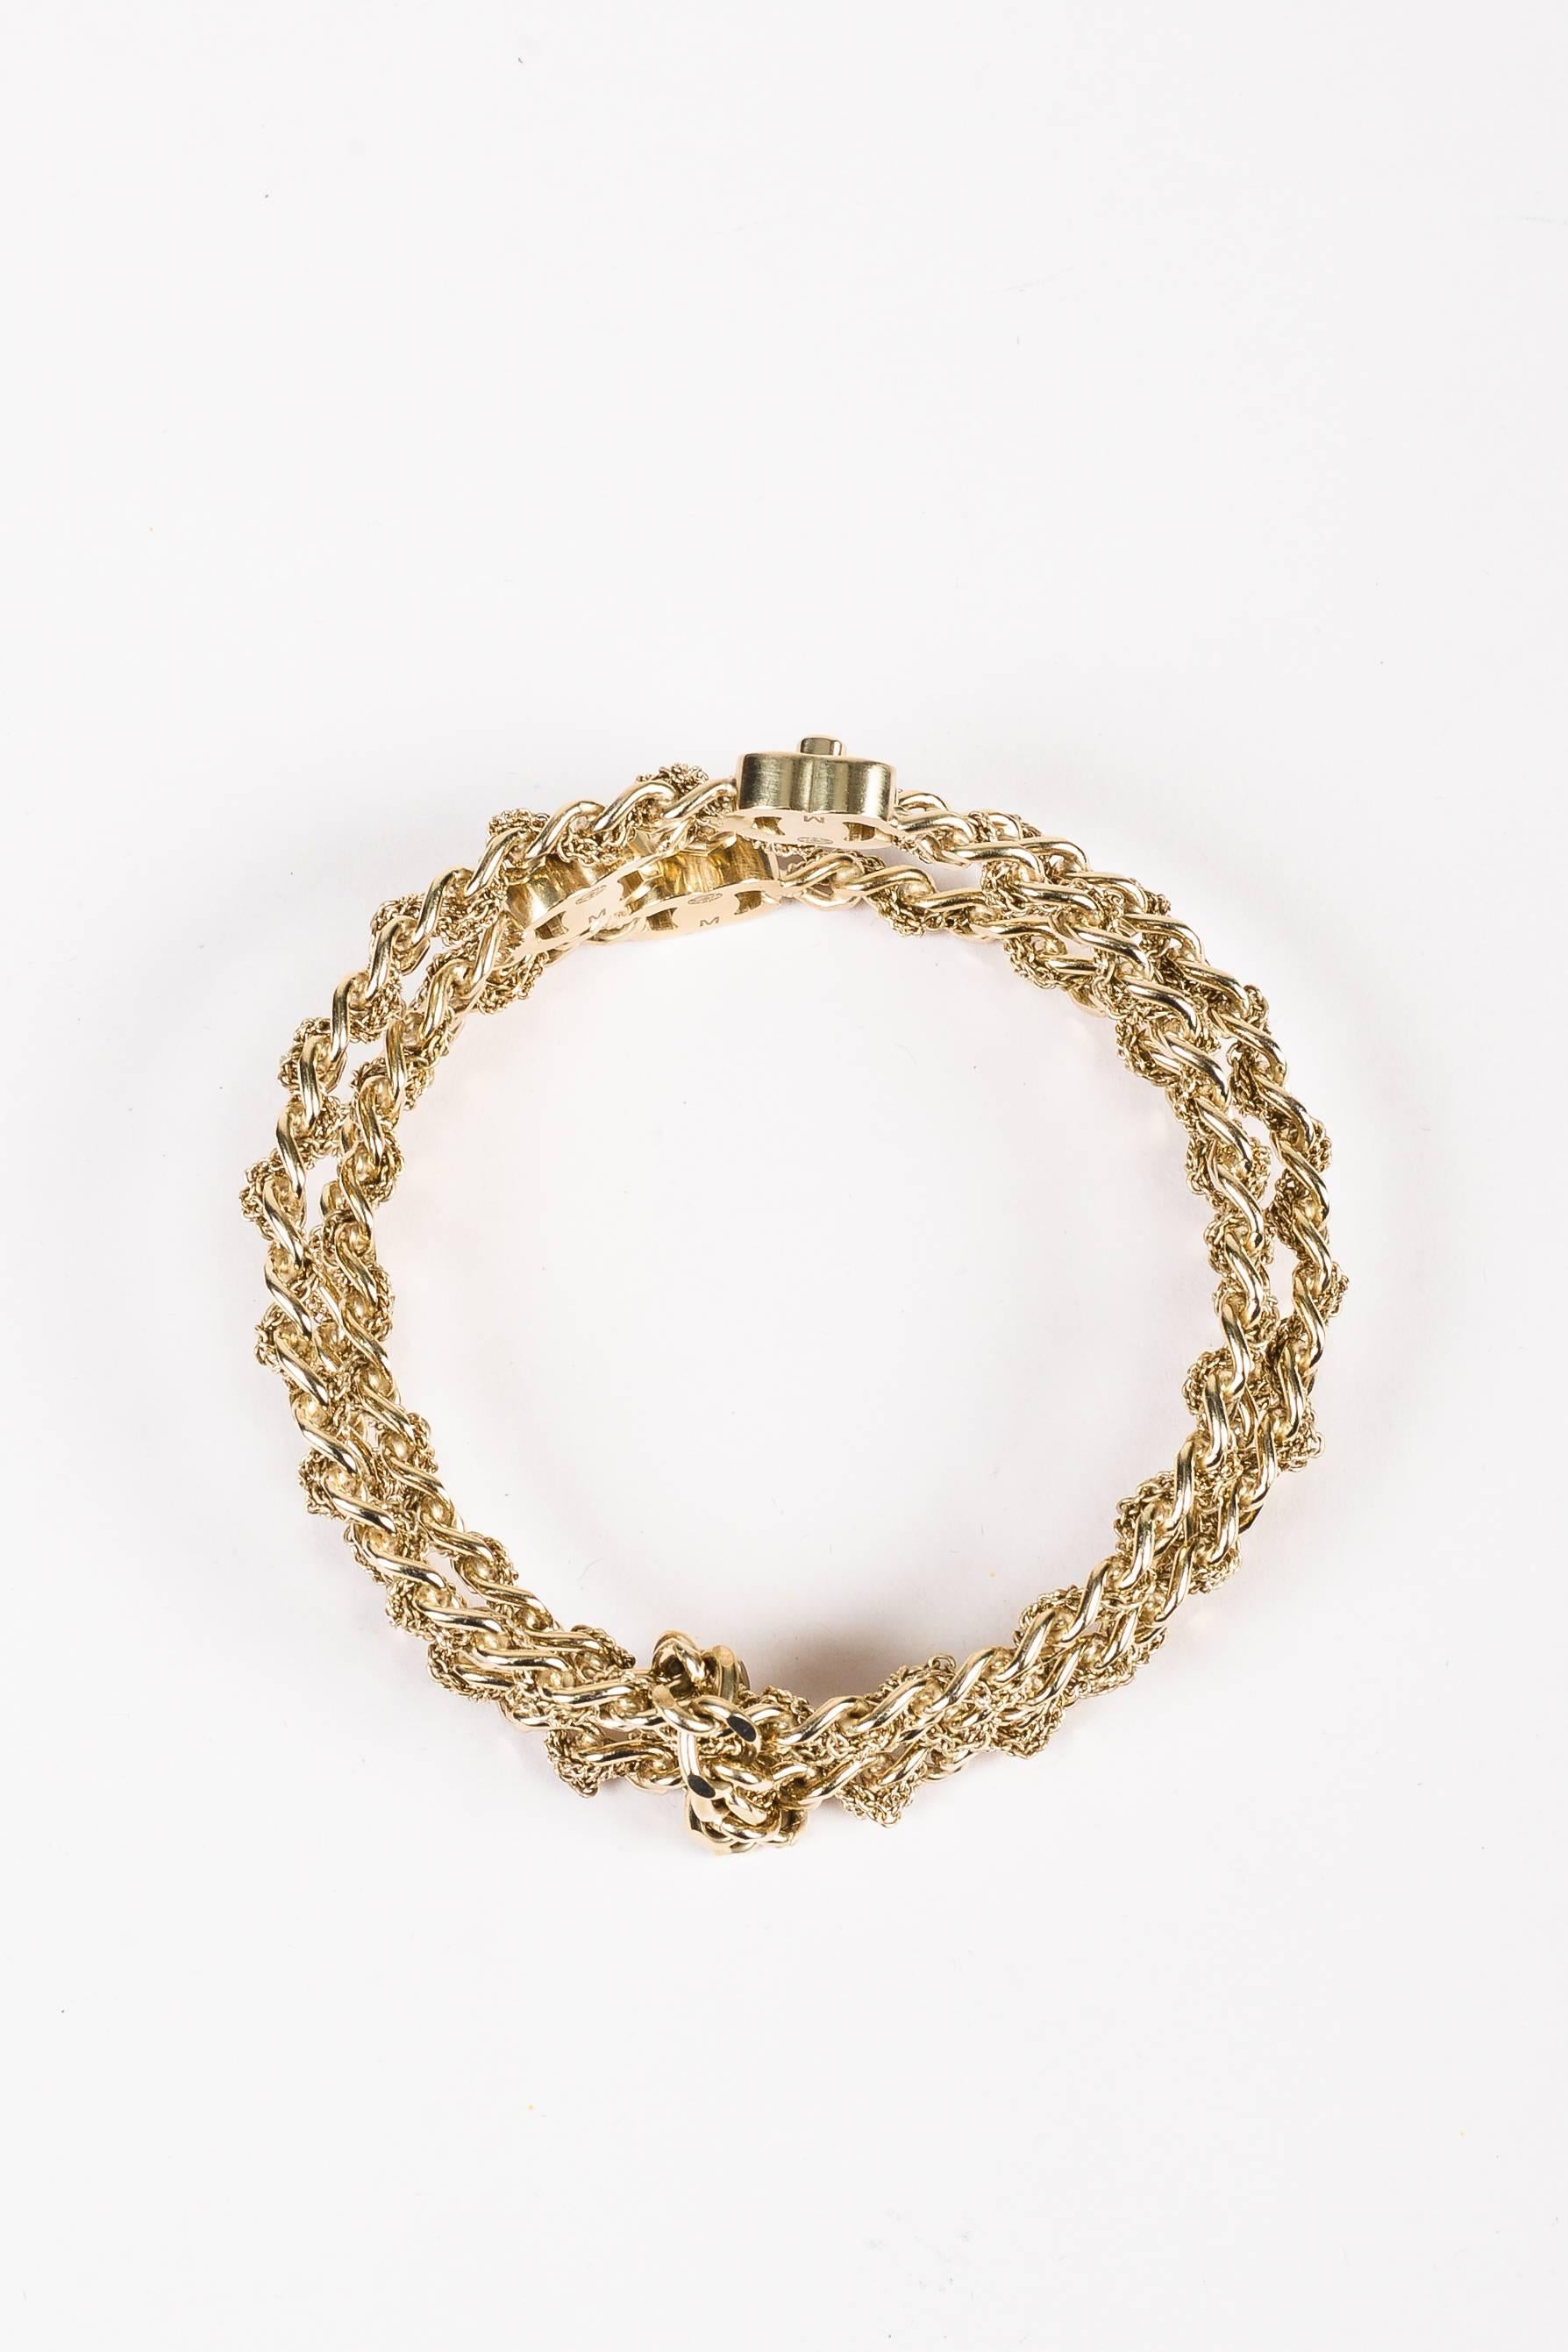 Comes in dust bag. Ultra chic bangle bracelet set from the 2012 Spring Collection. A rare collector's item, this piece features signature Chanel elements & an understated, yet timeless design. Gold-tone metal. Multiple, dainty chains woven